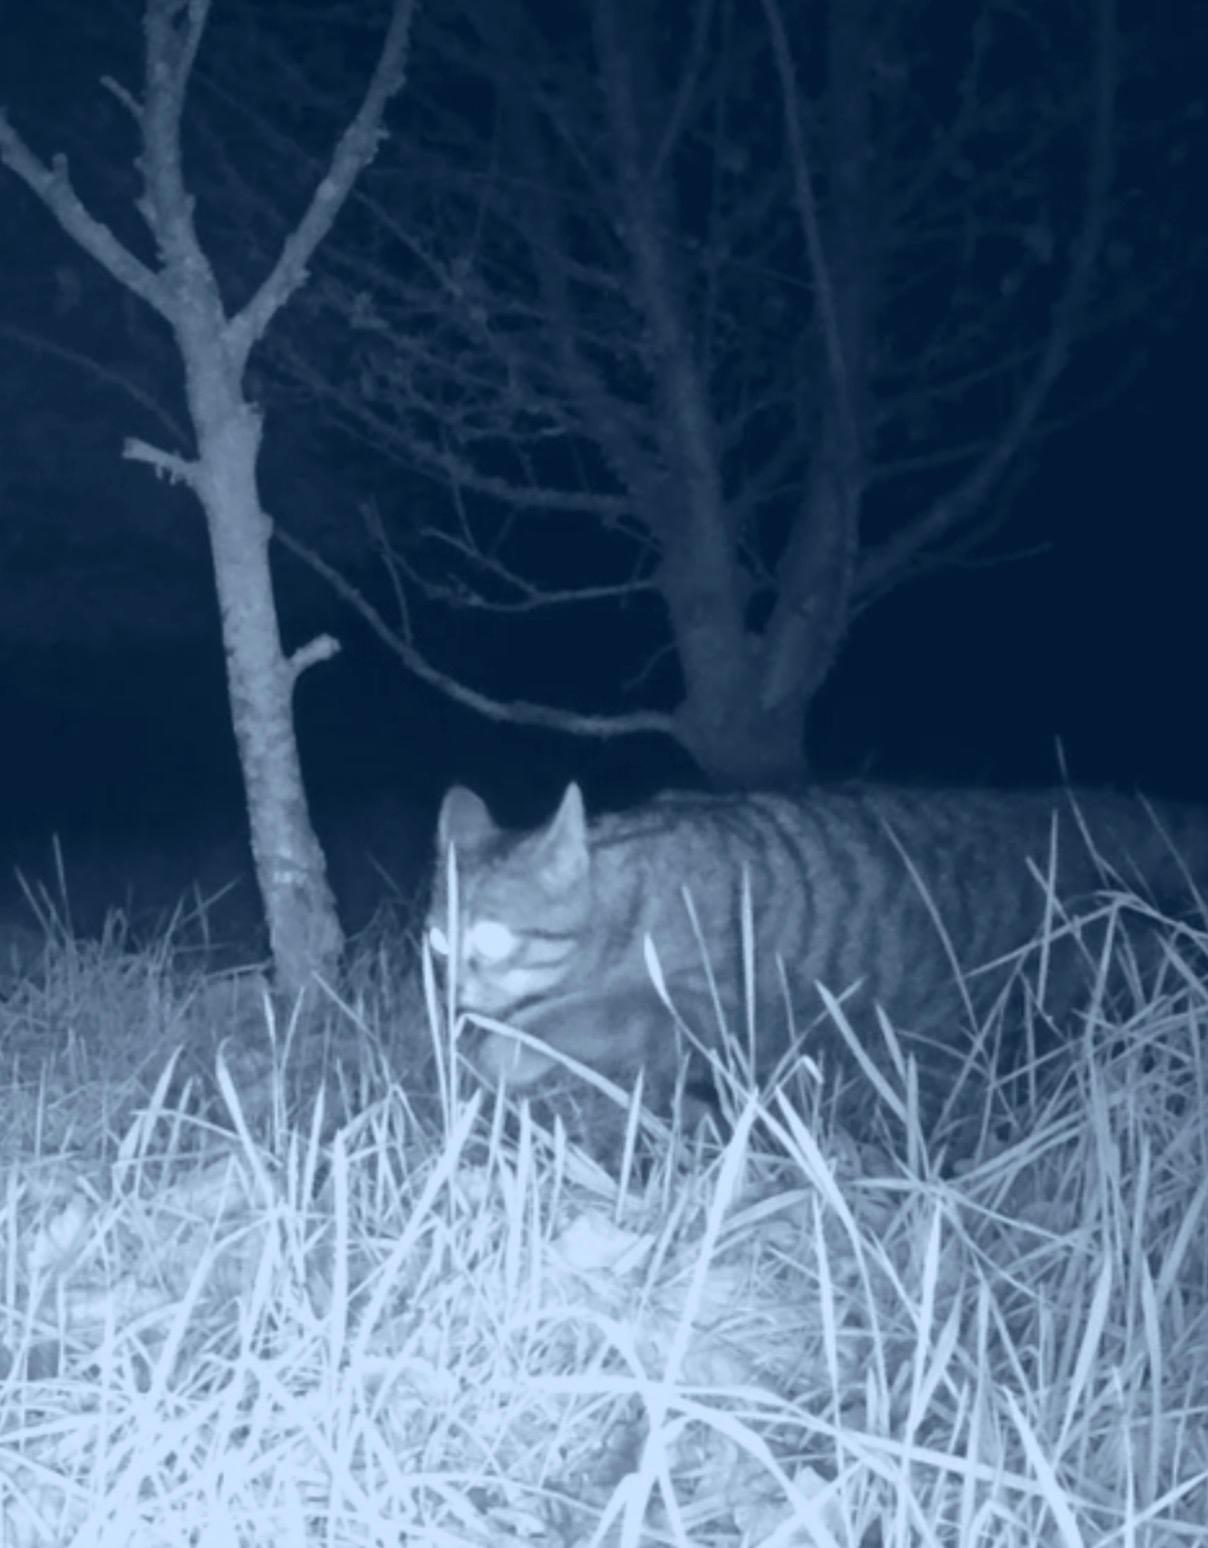 Wildcat Haven captured the footage of the elusive Wildcat at Clashindarroch in Aberdeenshire at the start of April.